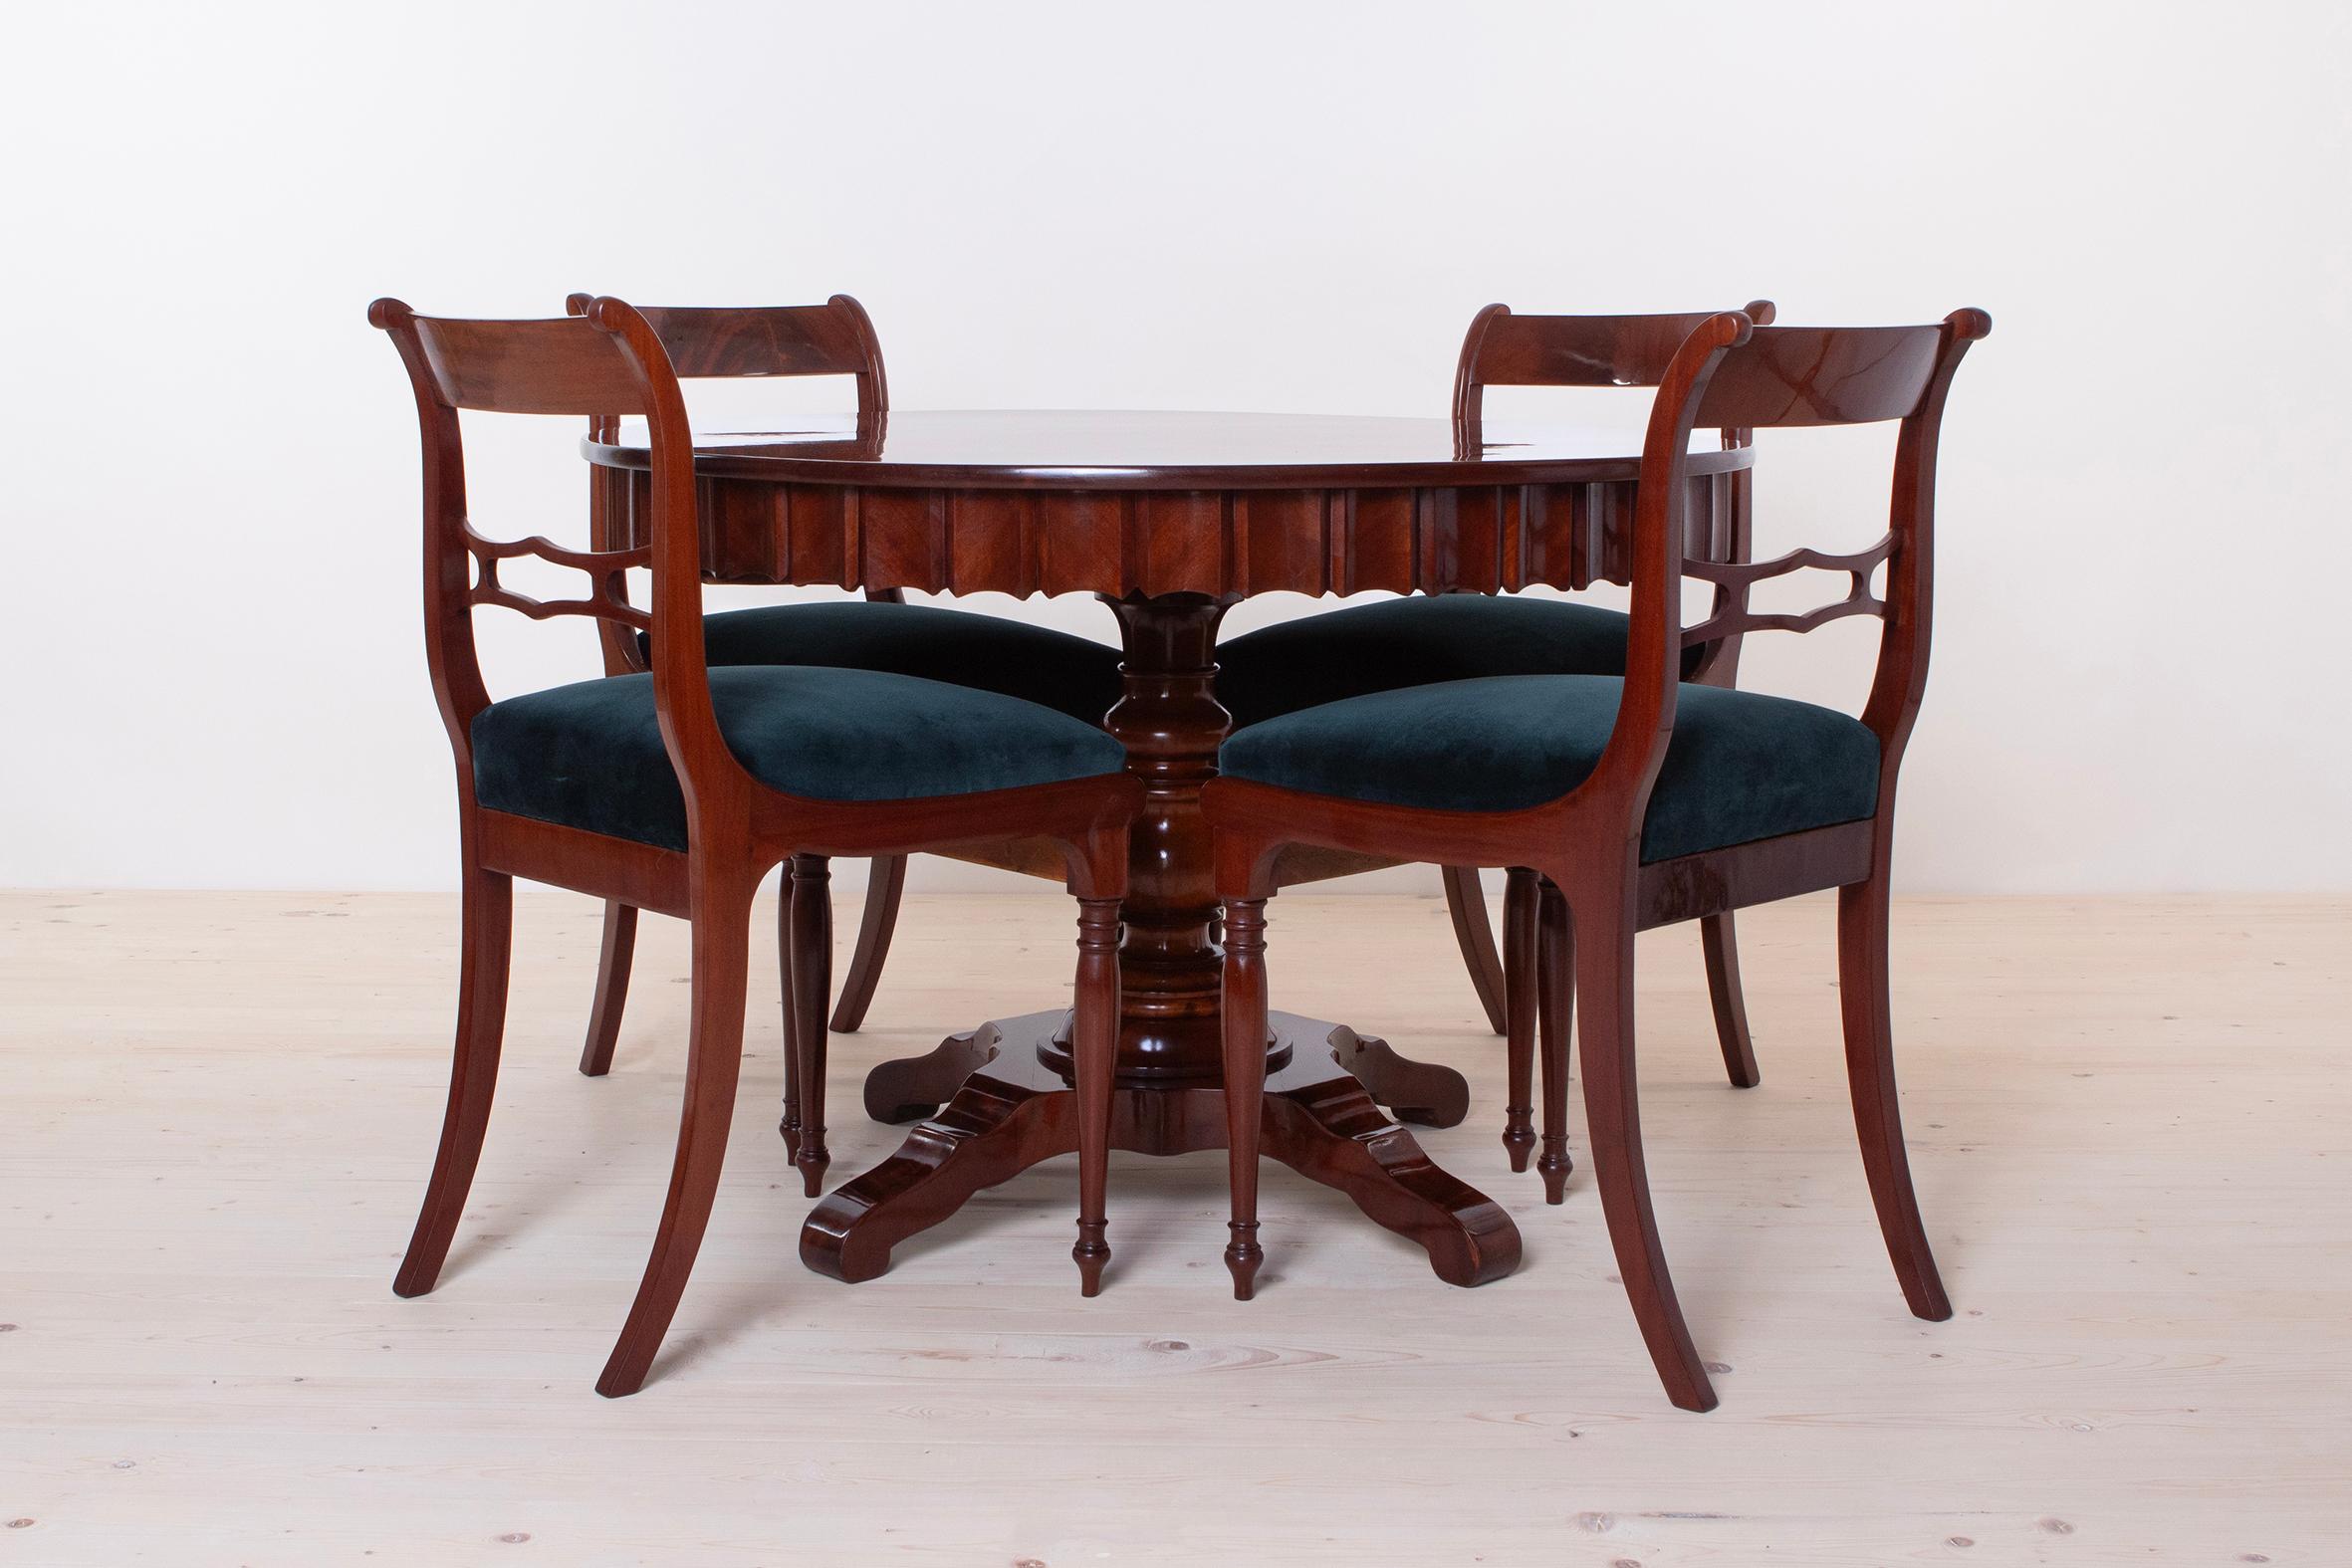 Austrian Biedermeier Dining Set, Round Table, 4 Chairs, Fully Restored, 19th Century For Sale